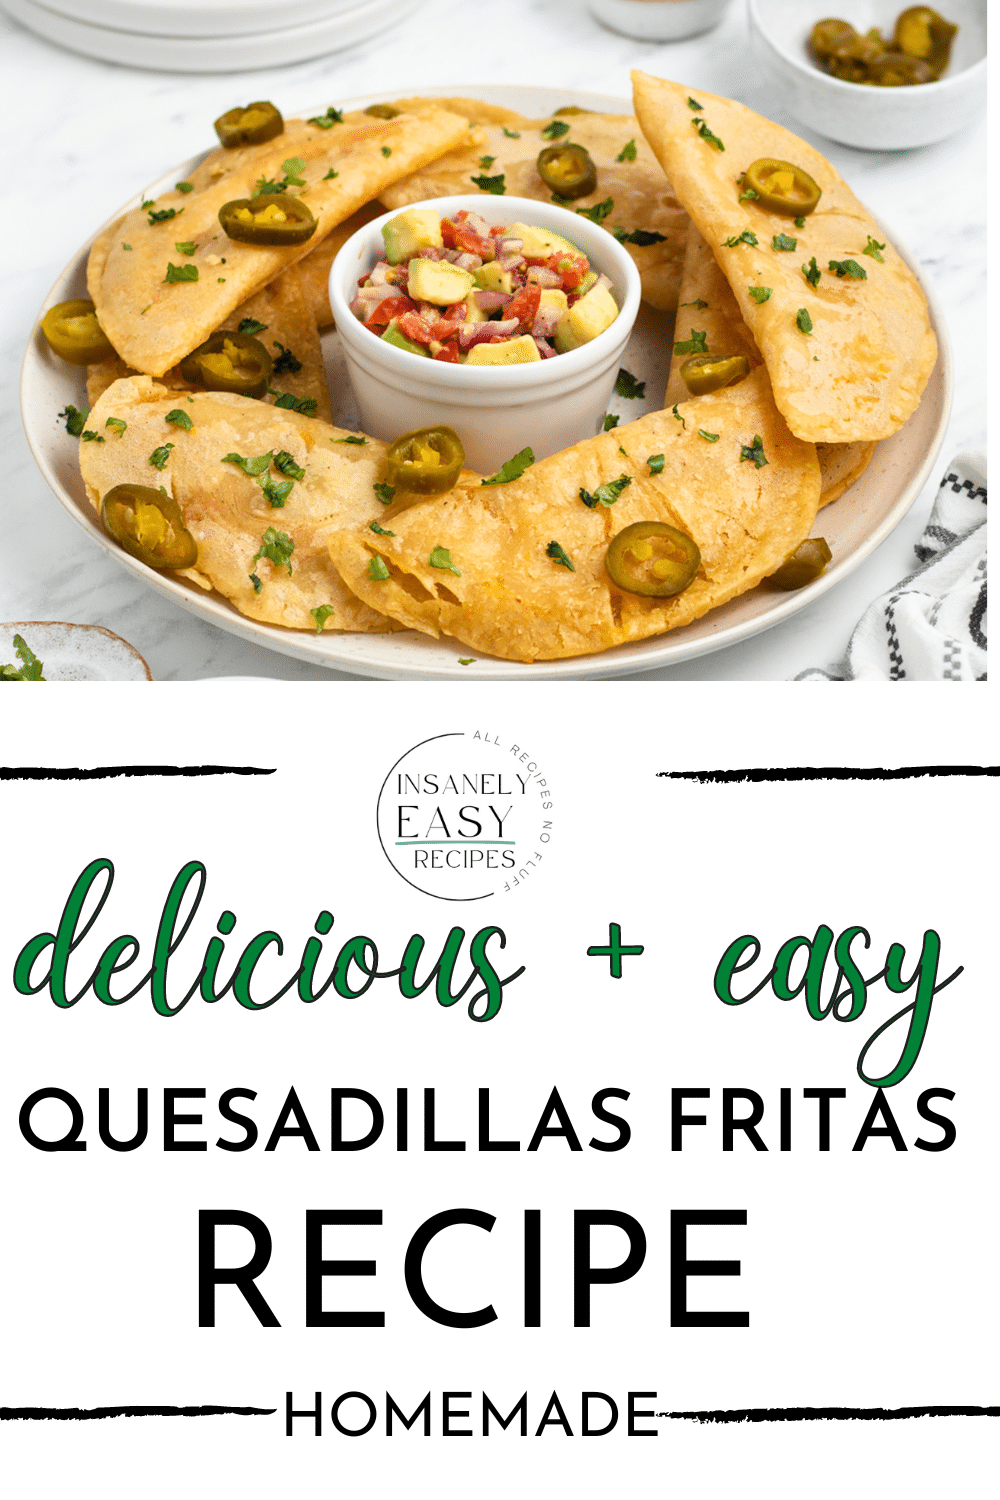 fried quesadillas on a platter with salsa in a cup in the center. Text at bottom half of photo says "delicious and easy quesadillas fritas recipe, homemade"